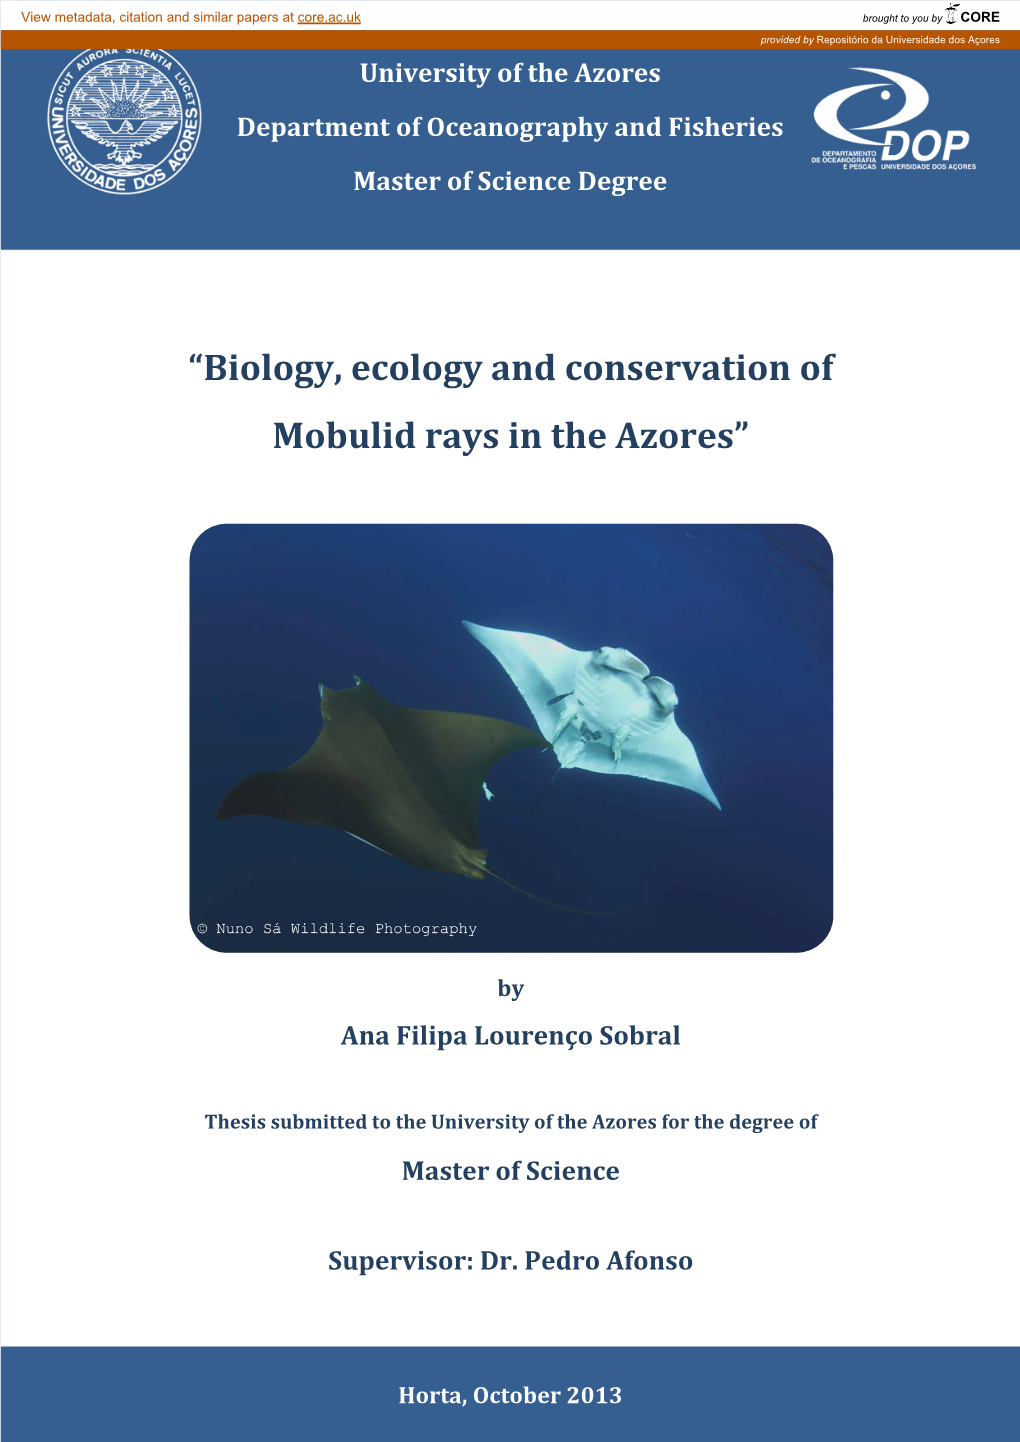 Biology, Ecology and Conservation of Mobulid Rays in the Azores”